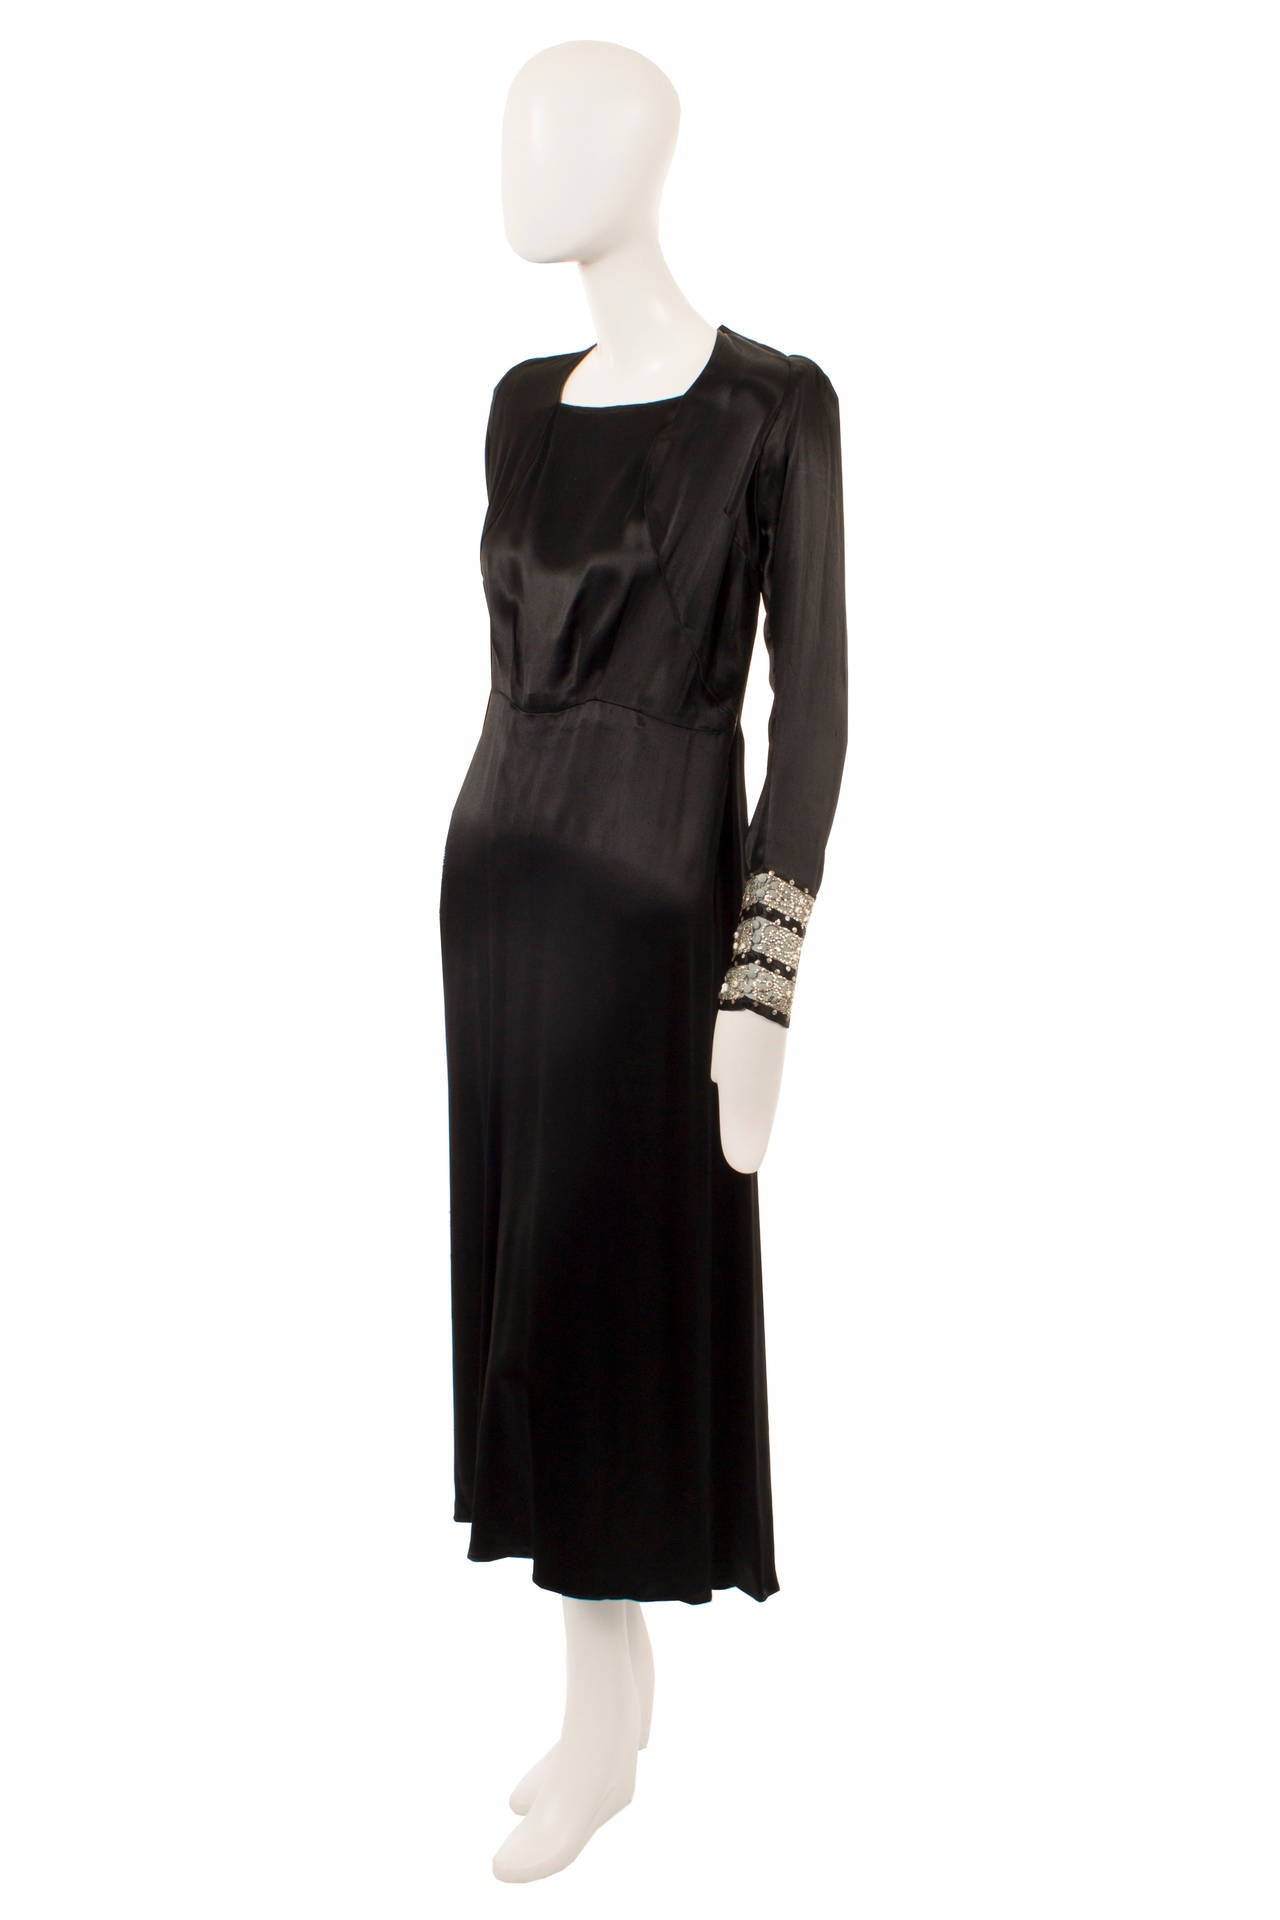 Lanvin haute couture black silk dress, spring summer 1938 For Sale at